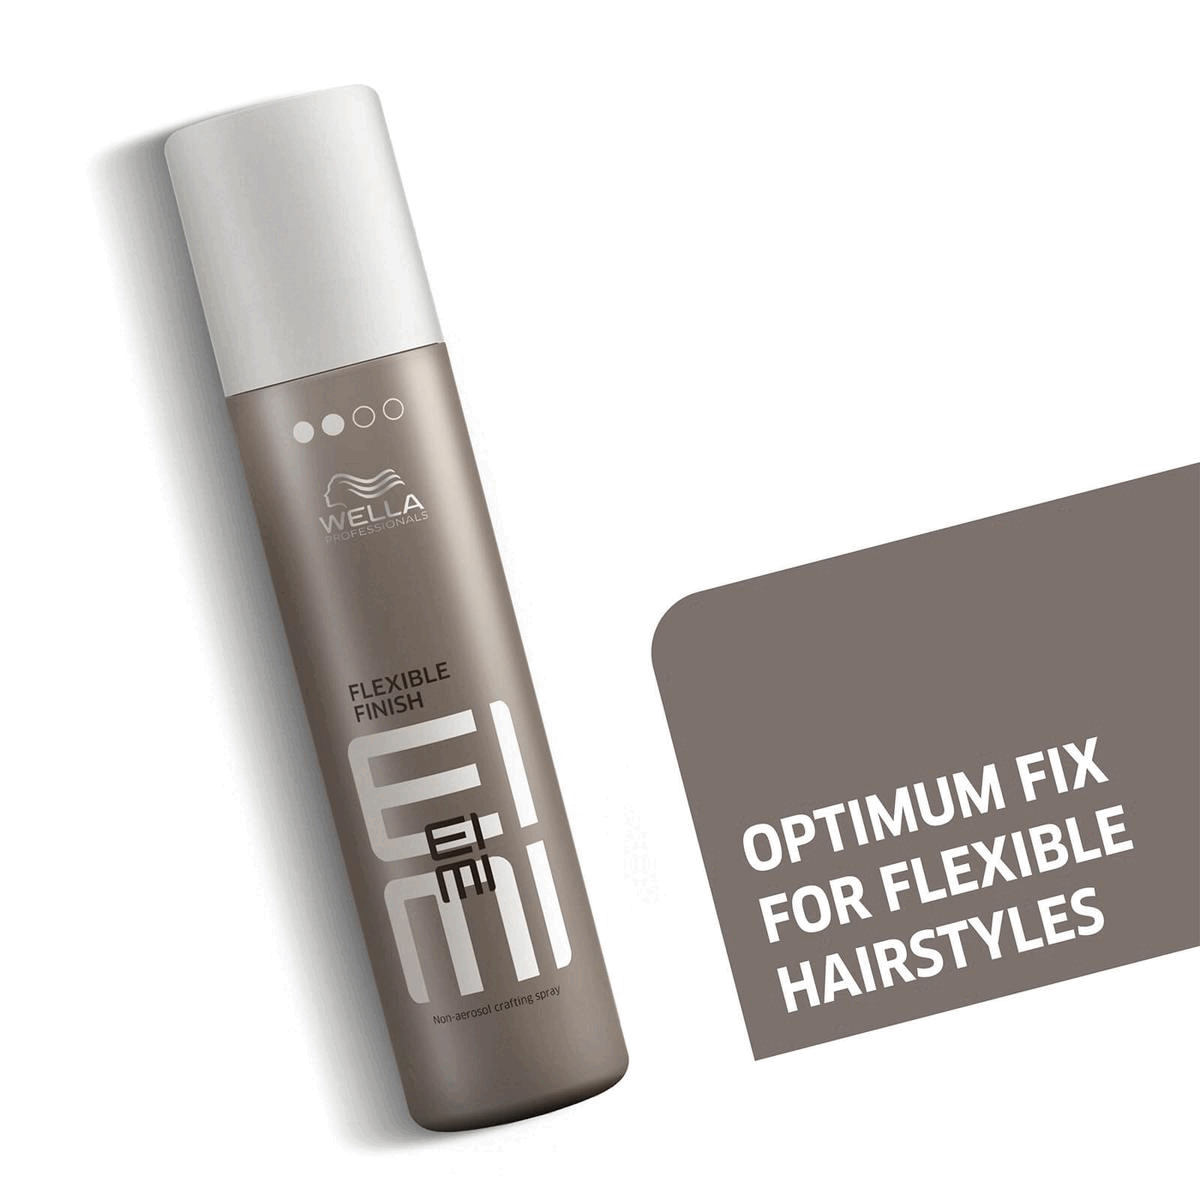 flexible hairstyle with light fix. optimum fix for flexible hairstyles. citrus scent. partner recommendation sold separately. discover other products. Fixing hairspray - extra strong finishing spray. Hold - 4